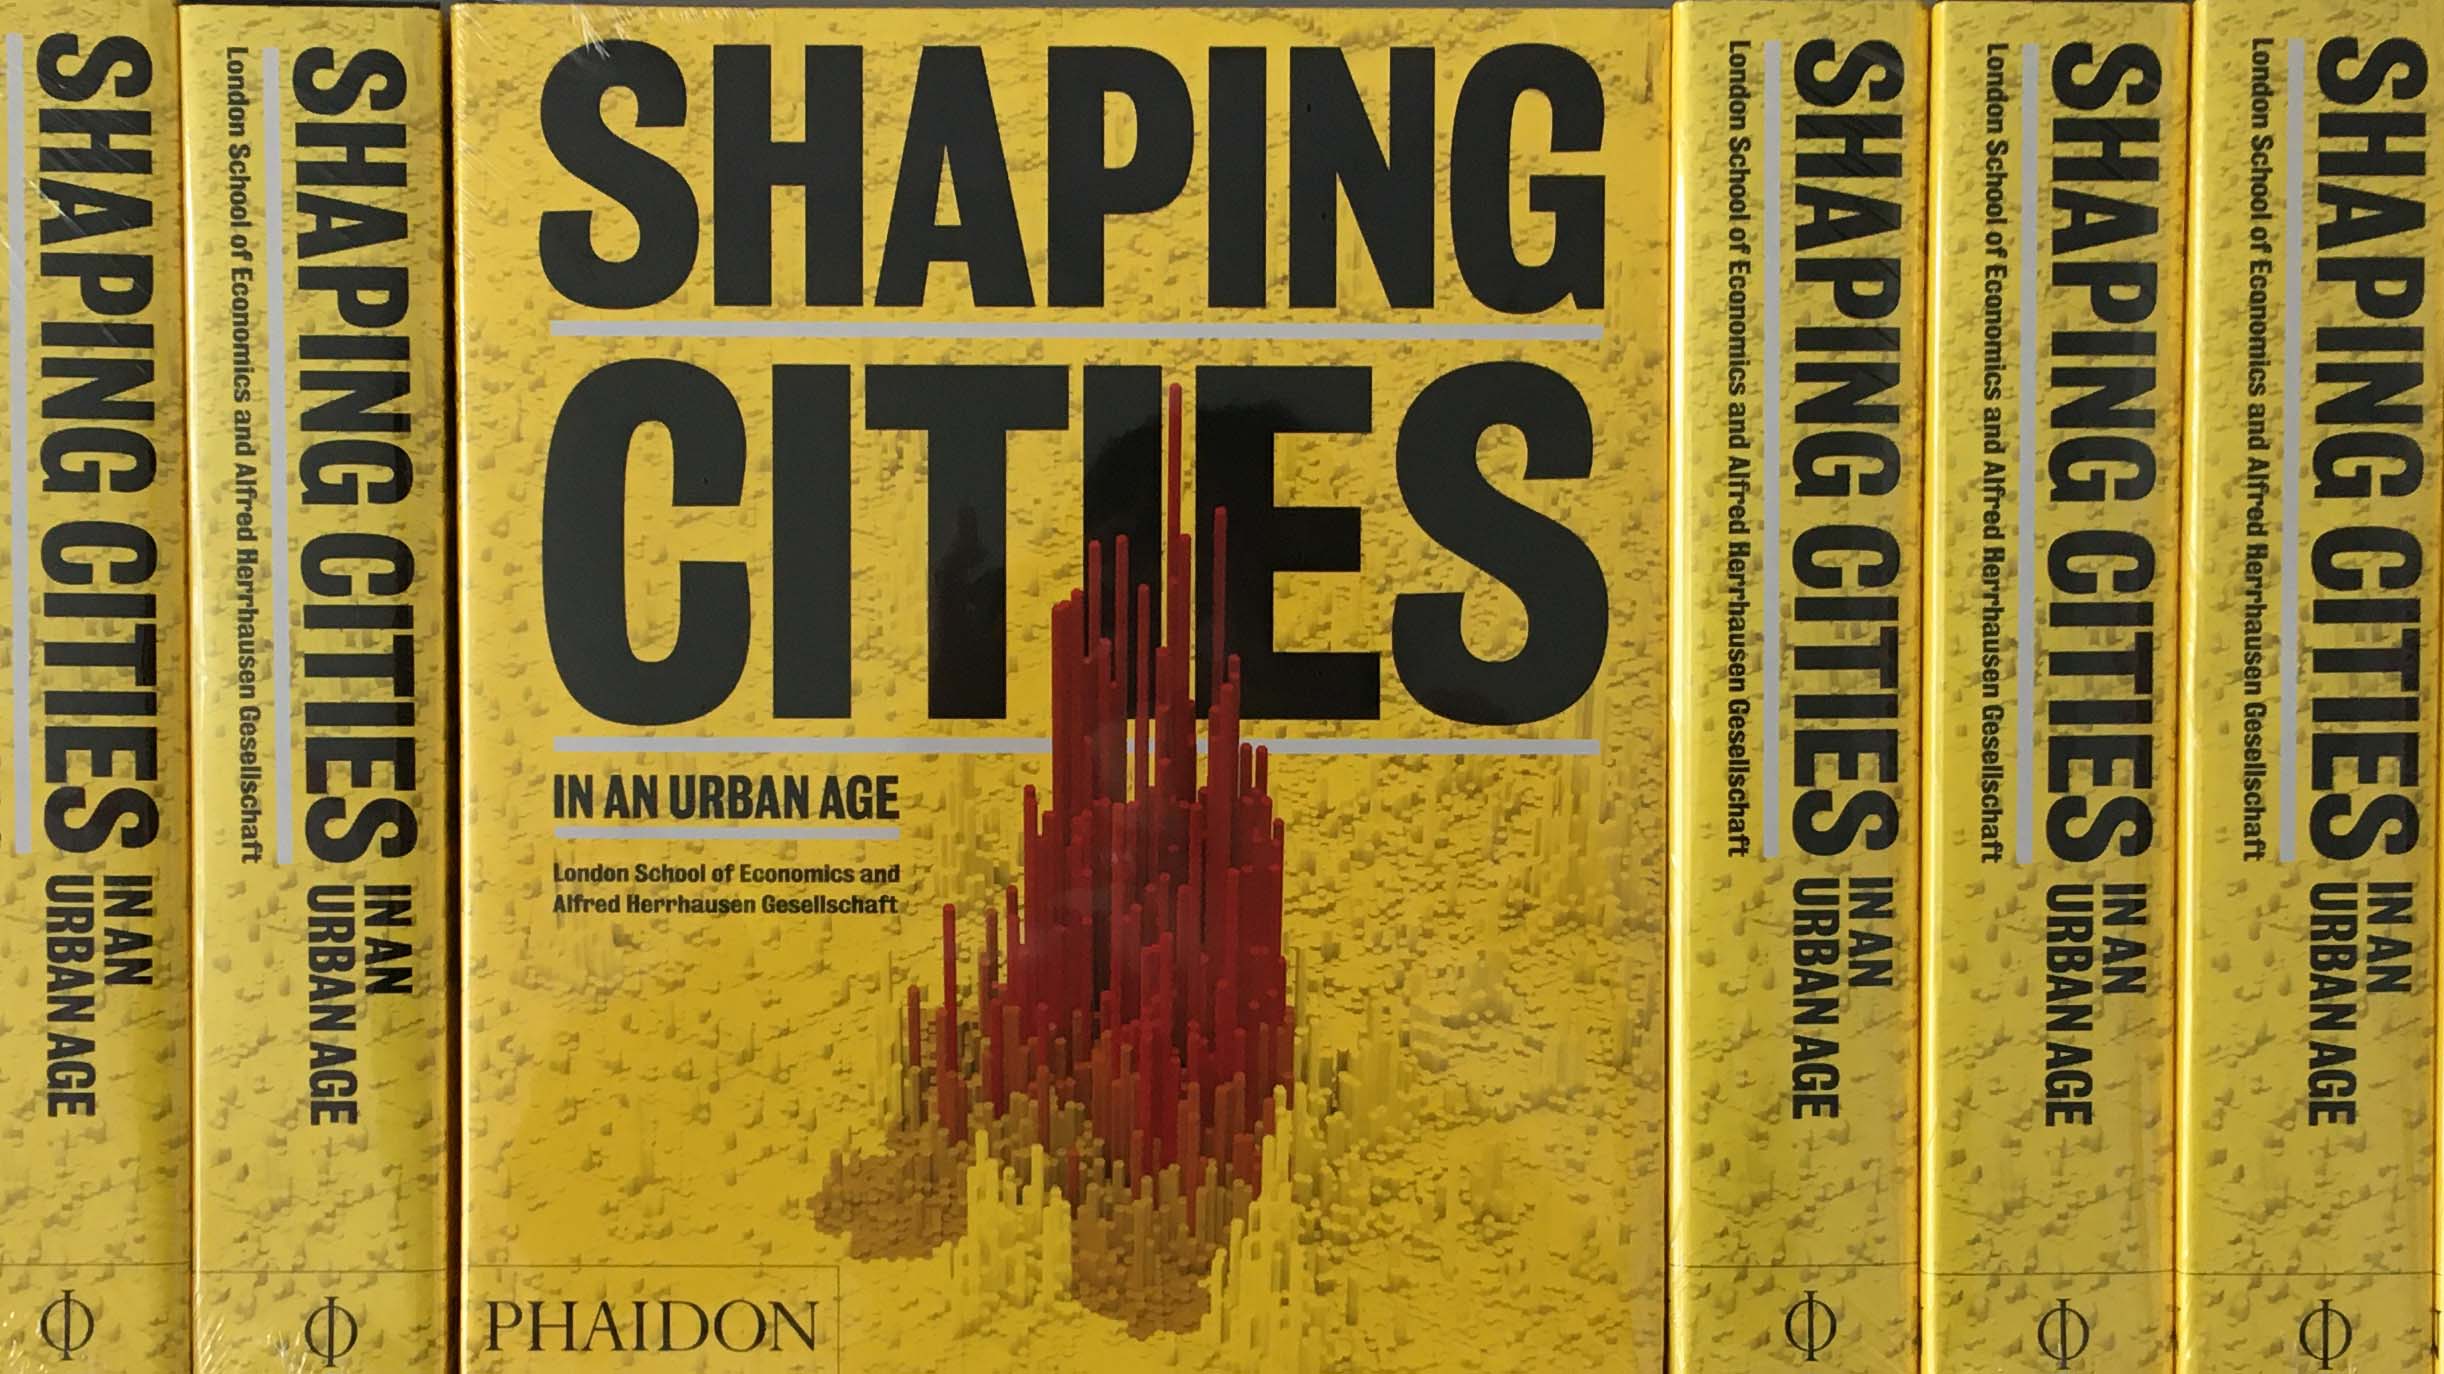 Shaping-cities-747x420